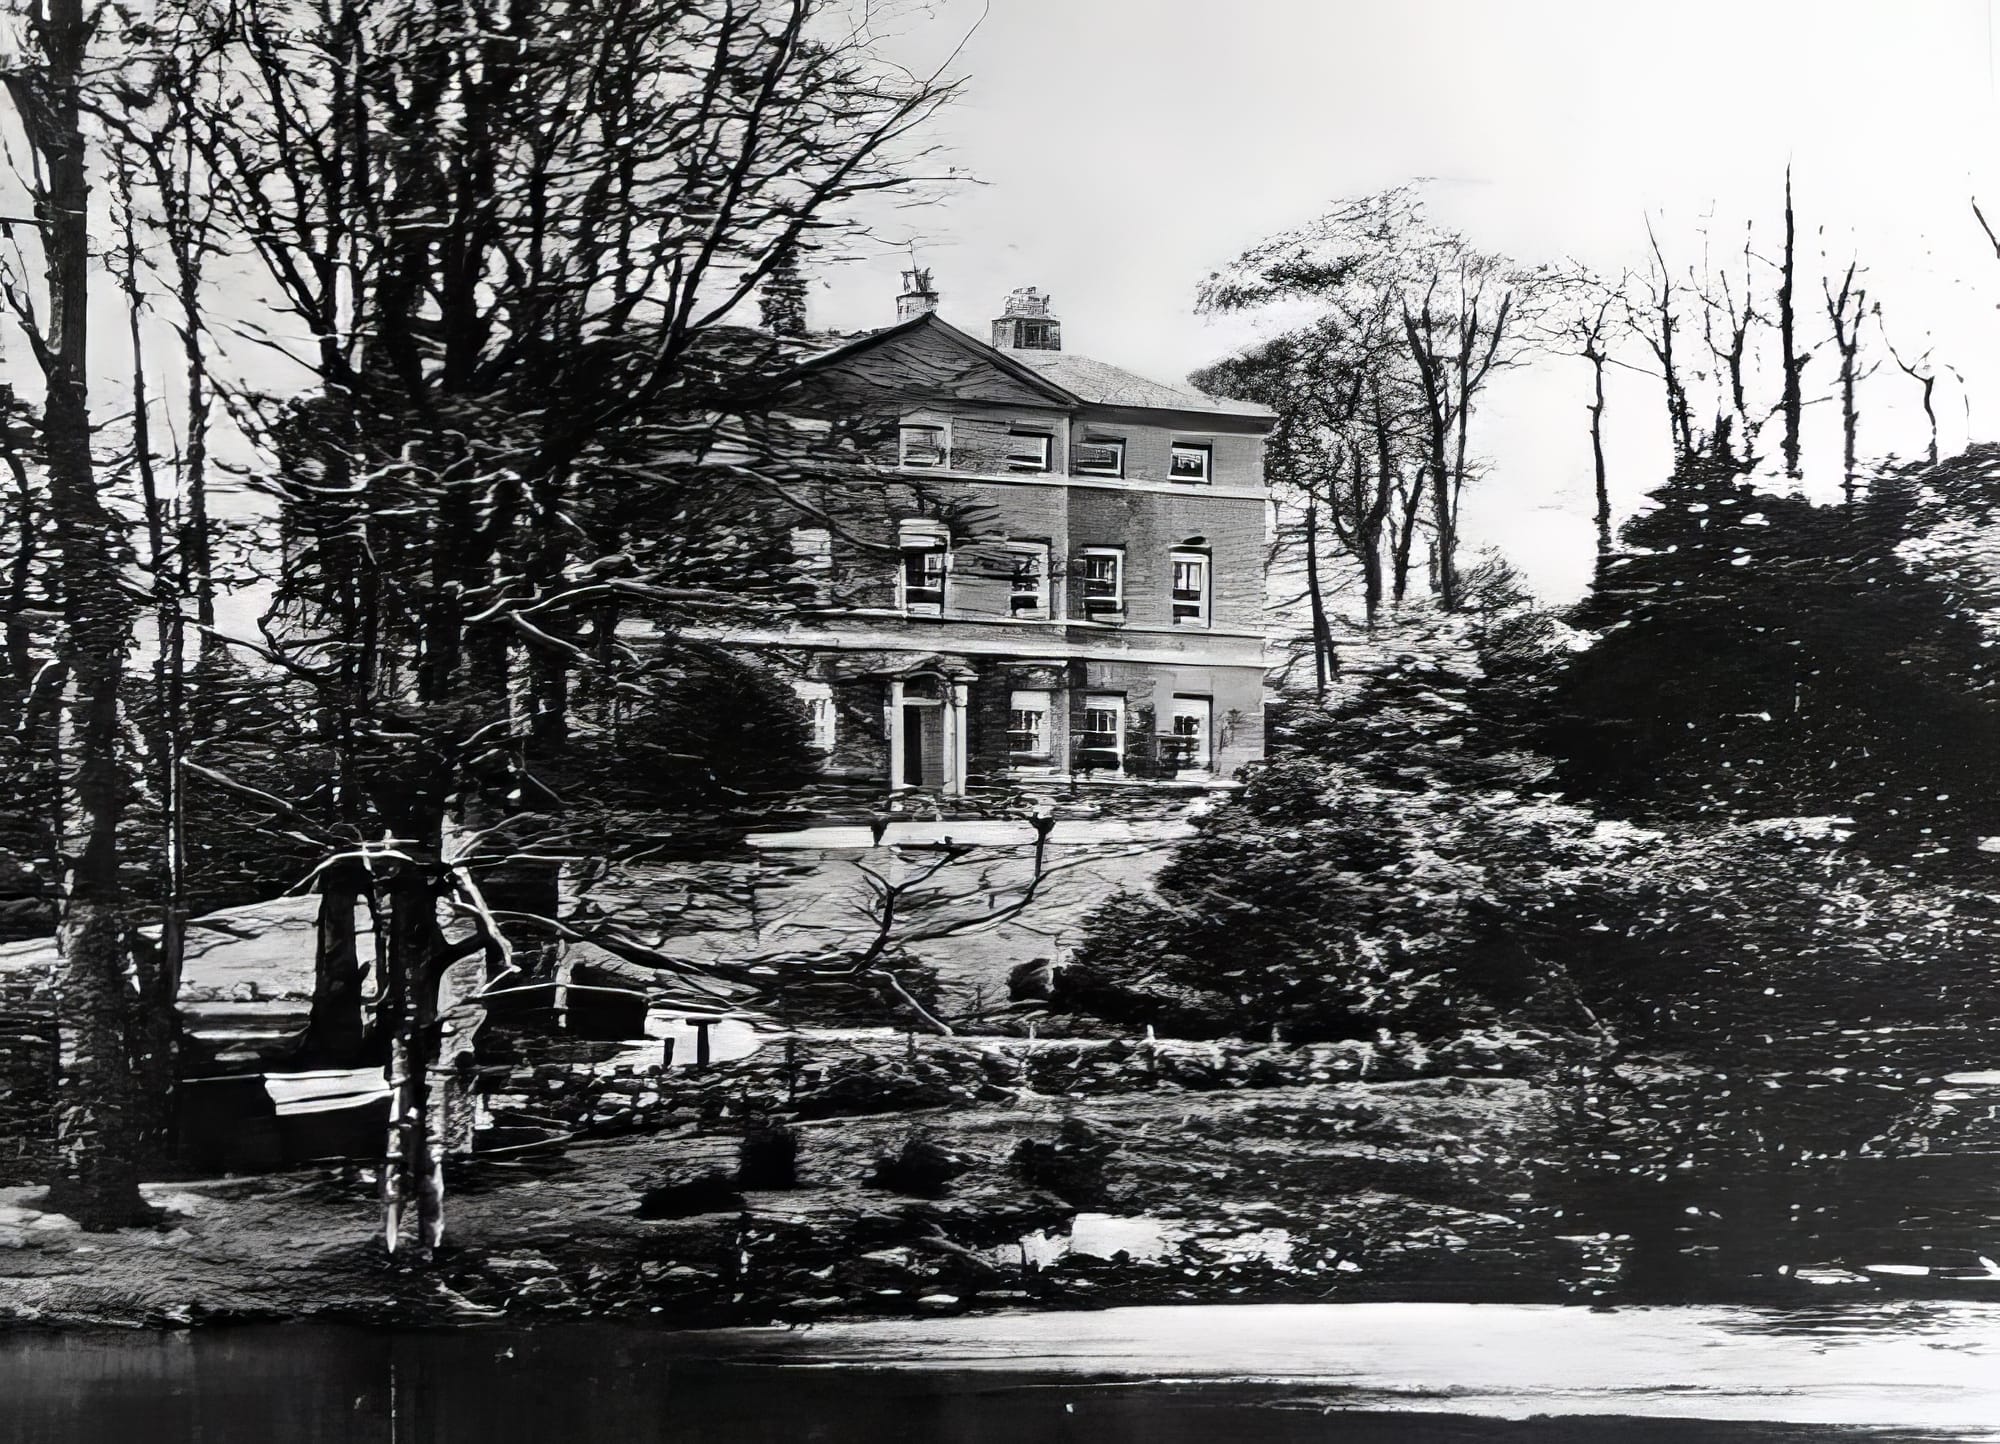 Revealing the History of the Hall Behind Park Hall's Name